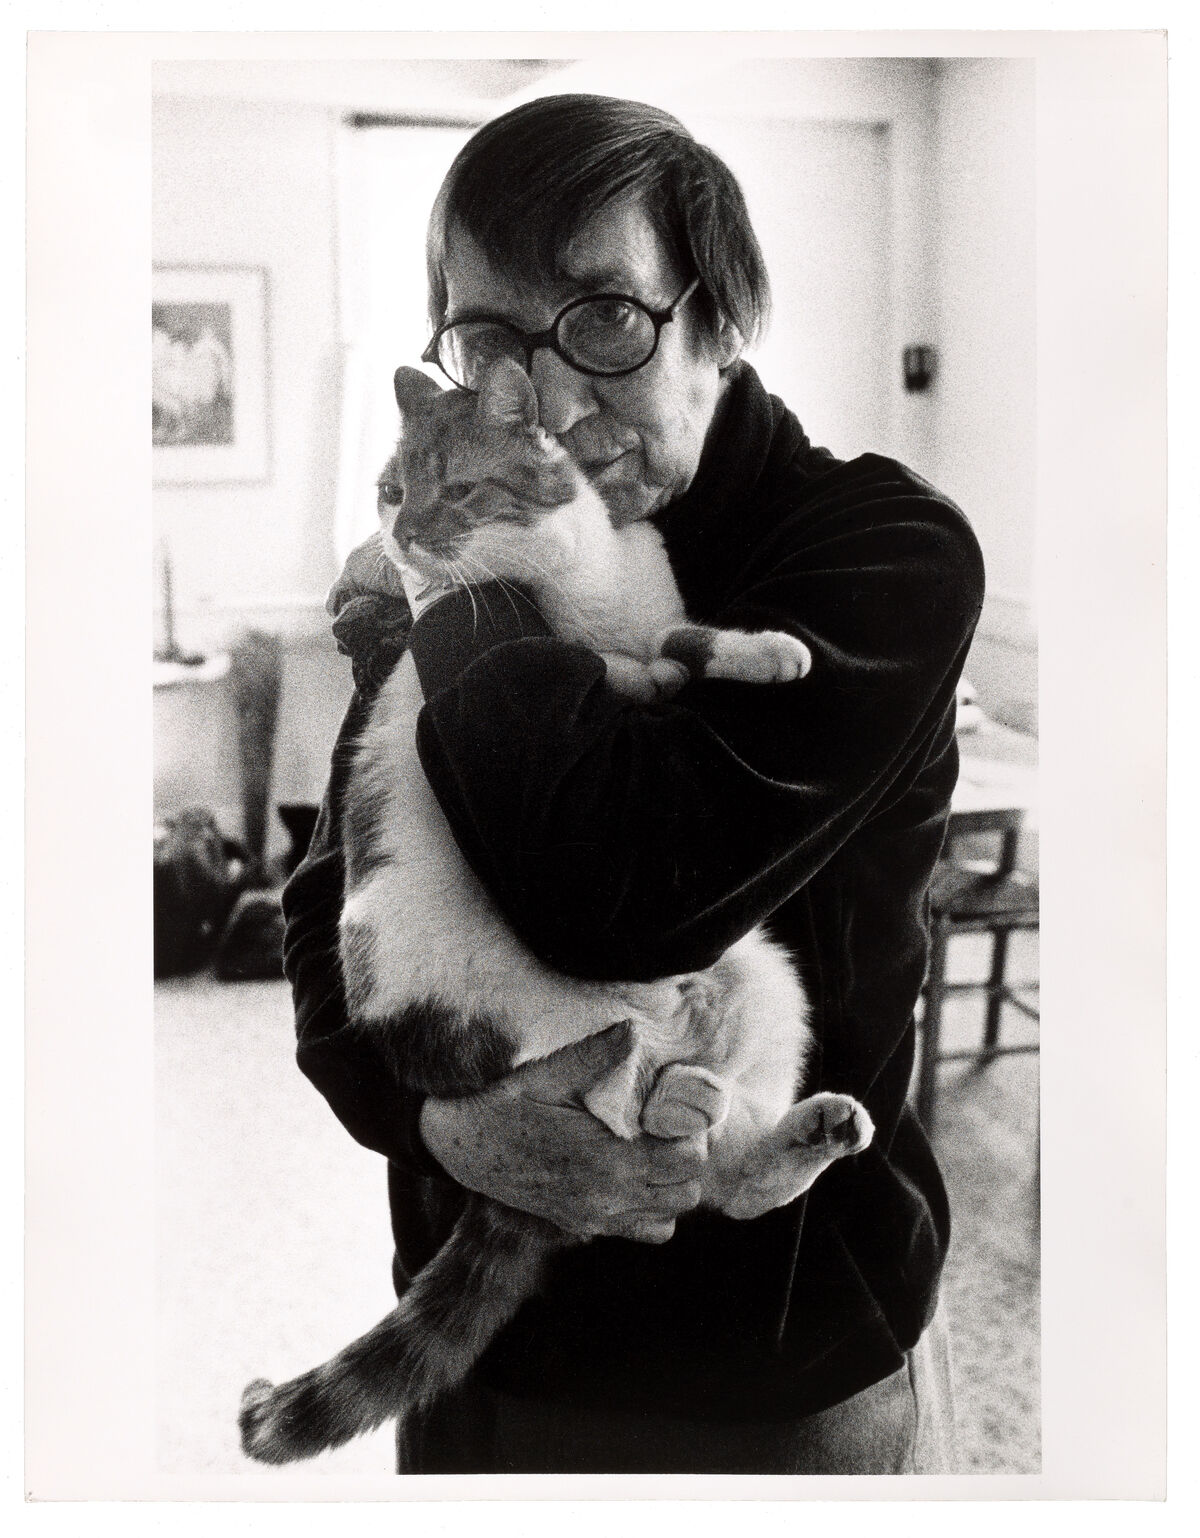 Berenice Abbott holding a cat. Image from Artful Cats  by Mary Savig, published by the Smithsonian’s Archives of American Art, 2019. Courtesy of the publishers.